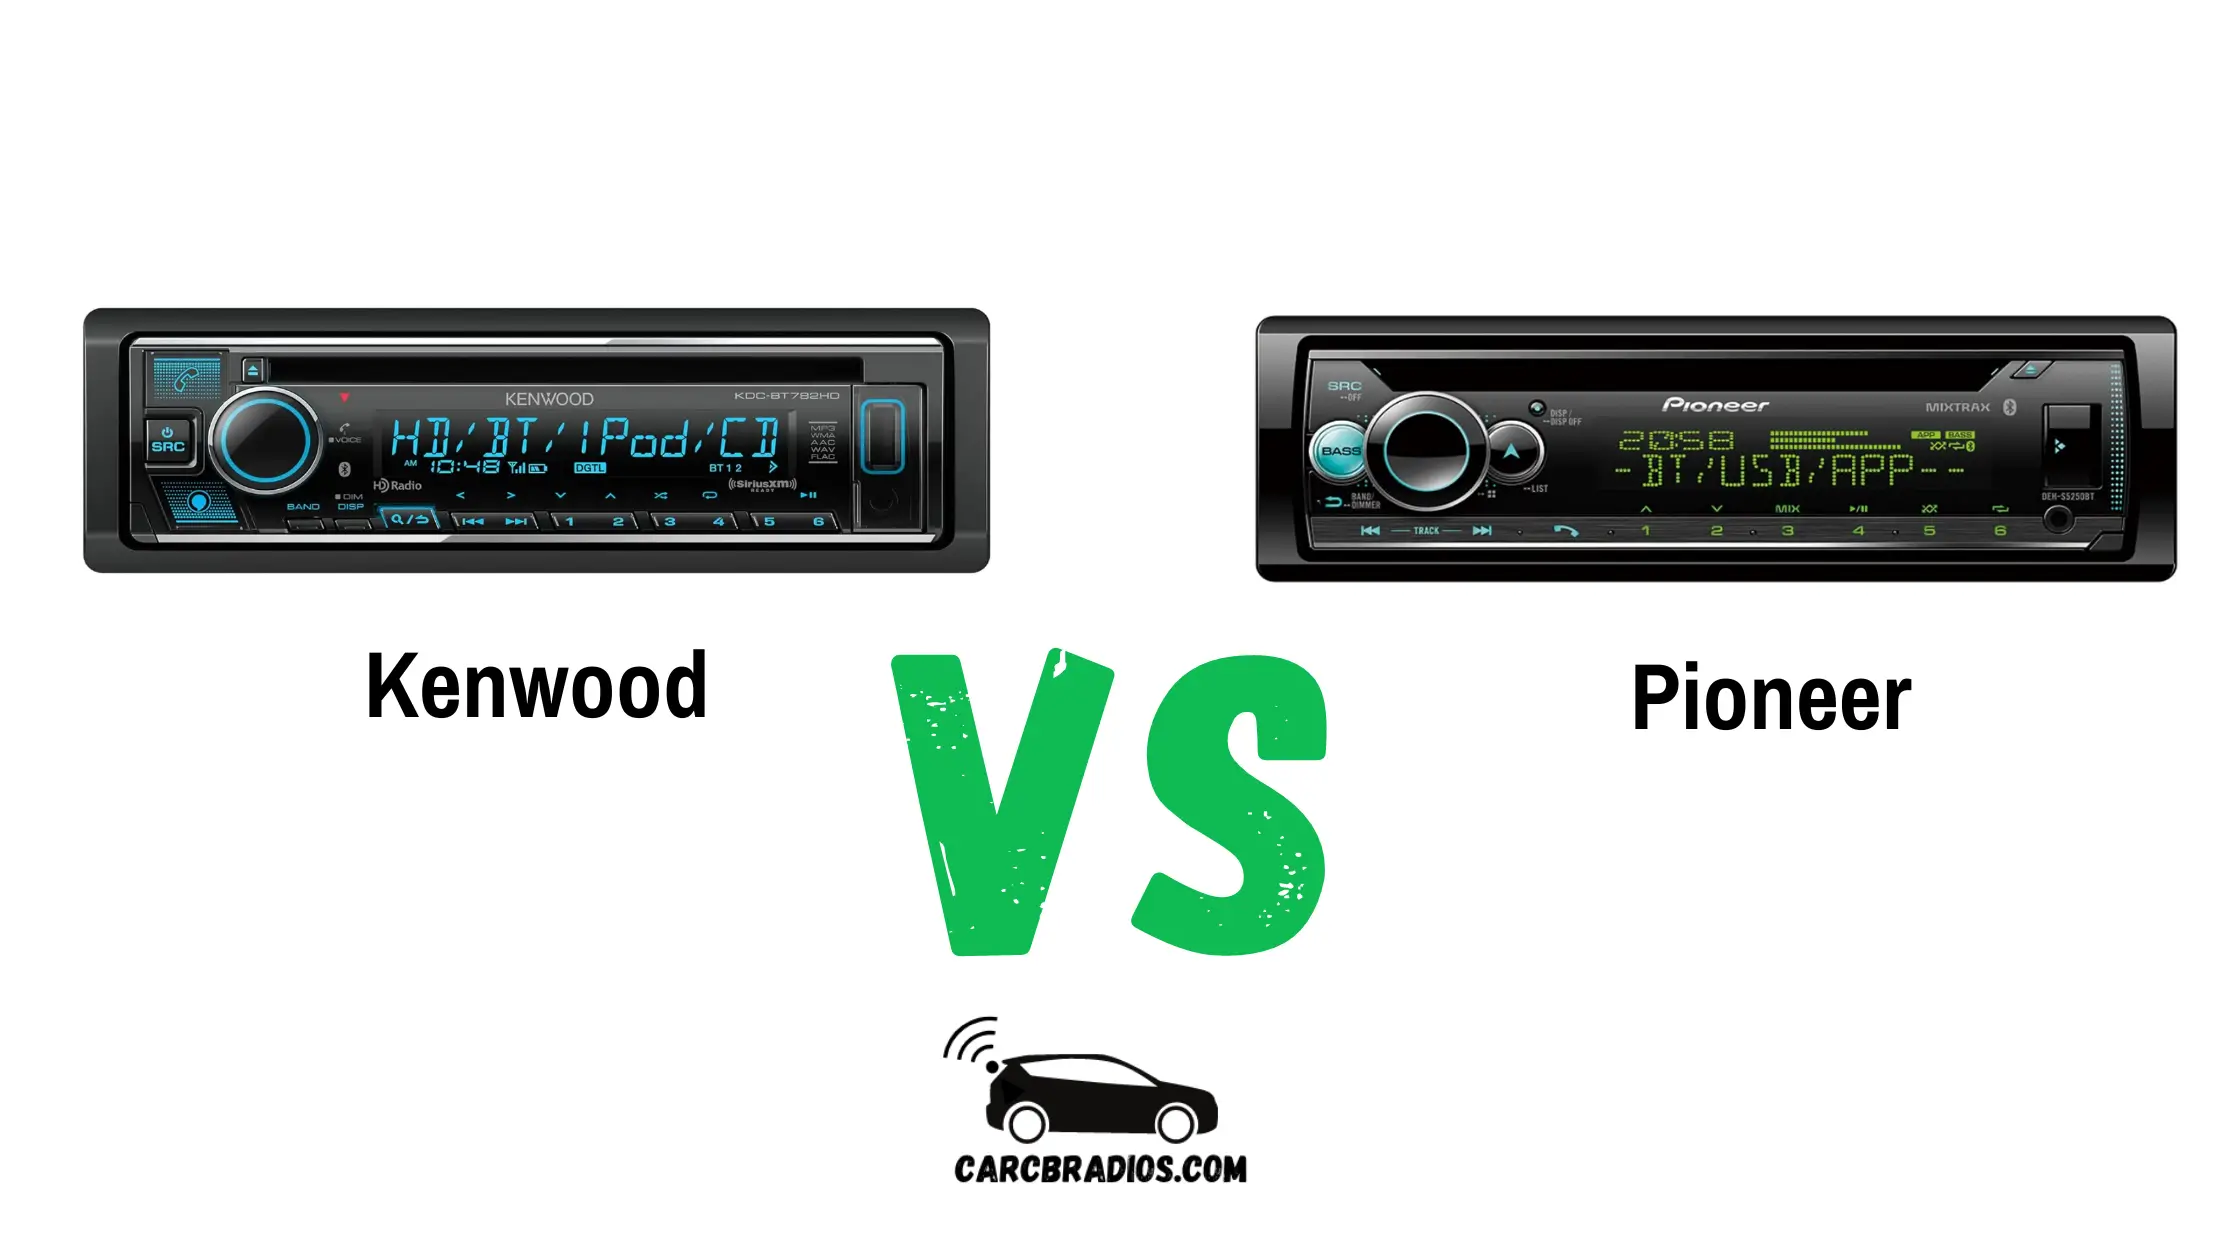 Kenwood car stereos have been around since the 1960s and have built up a reputation for producing high-quality audio equipment. Their products range from basic CD players to advanced multimedia receivers with built-in navigation systems. Pioneer, on the other hand, is a newer brand that has gained a lot of popularity in recent years. They offer a wide range of products that cater to different needs and budgets, from budget-friendly CD players to high-end multimedia receivers with advanced features.